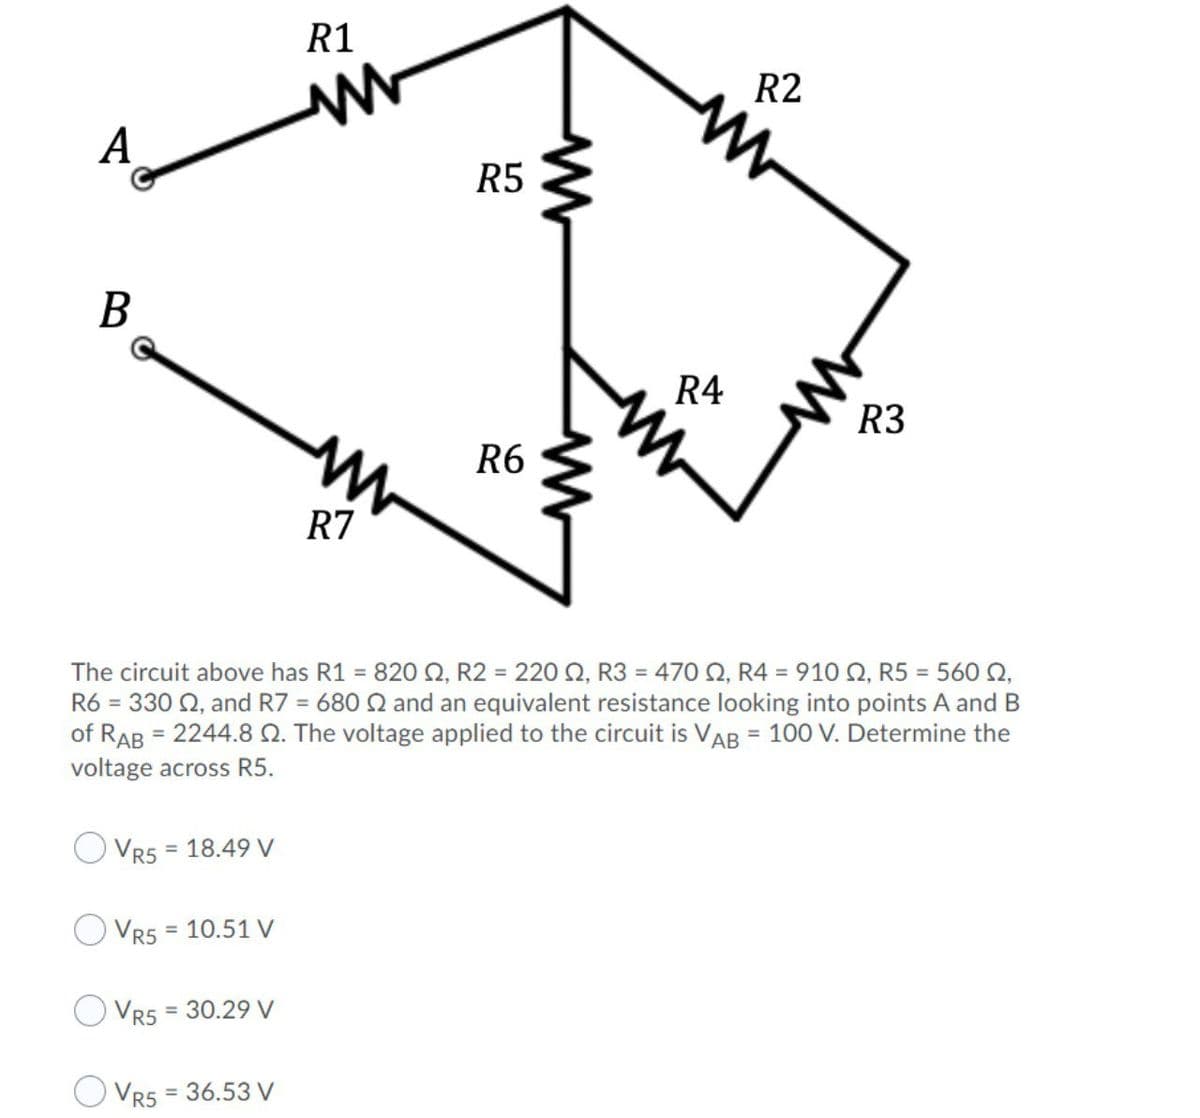 R1
R2
A
R5
B
R4
R3
R6
R7
The circuit above has R1 = 820 Q, R2 = 220 Q, R3 = 470 N, R4 = 910 Q, R5 = 560 Q,
R6 = 330 Q, and R7 = 680 Q and an equivalent resistance looking into points A and B
of RAB = 2244.8 . The voltage applied to the circuit is VAB = 100 V. Determine the
voltage across R5.
%3D
= 18.49 V
VR5
Vr5 = 10.51 V
%3D
VR5
= 30.29 V
O Vr5 = 36.53 V
